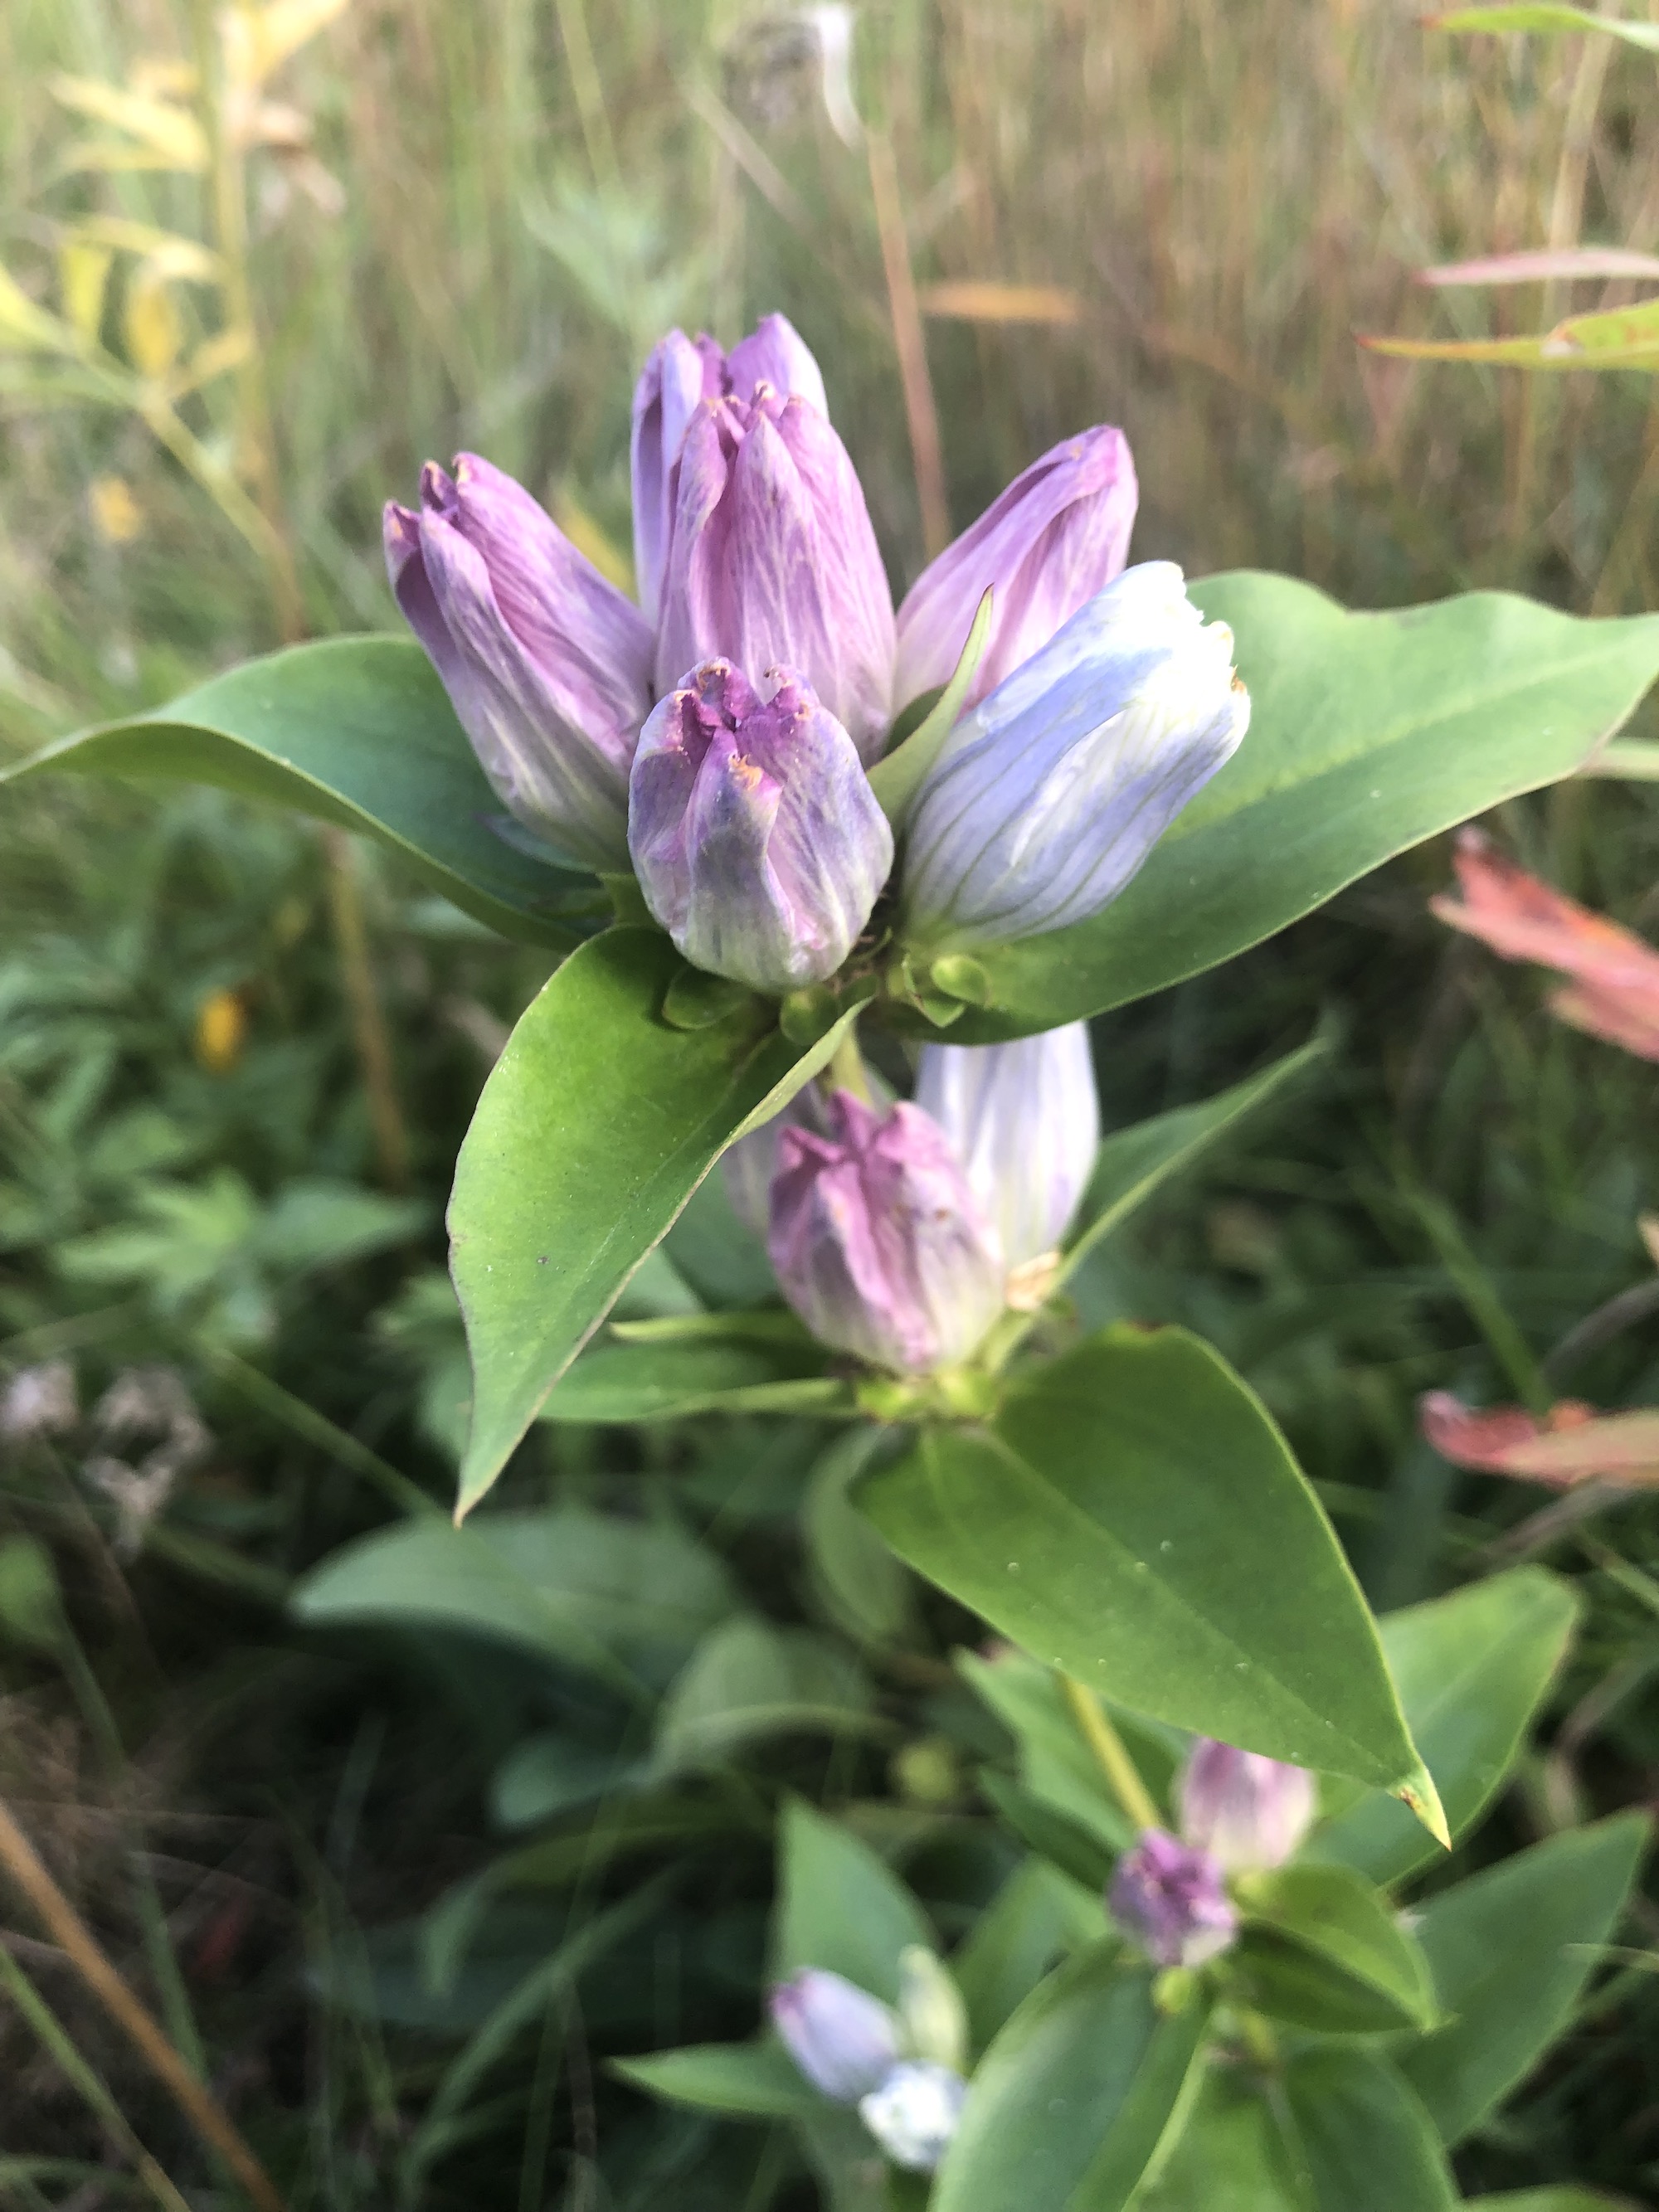 Closed Gentian in native garden by bike path and Odana Road in Madison, Wisconsin on Septemeber 8, 2021. This might be Great Lakes Gentian (Gentiana rubricaulis).